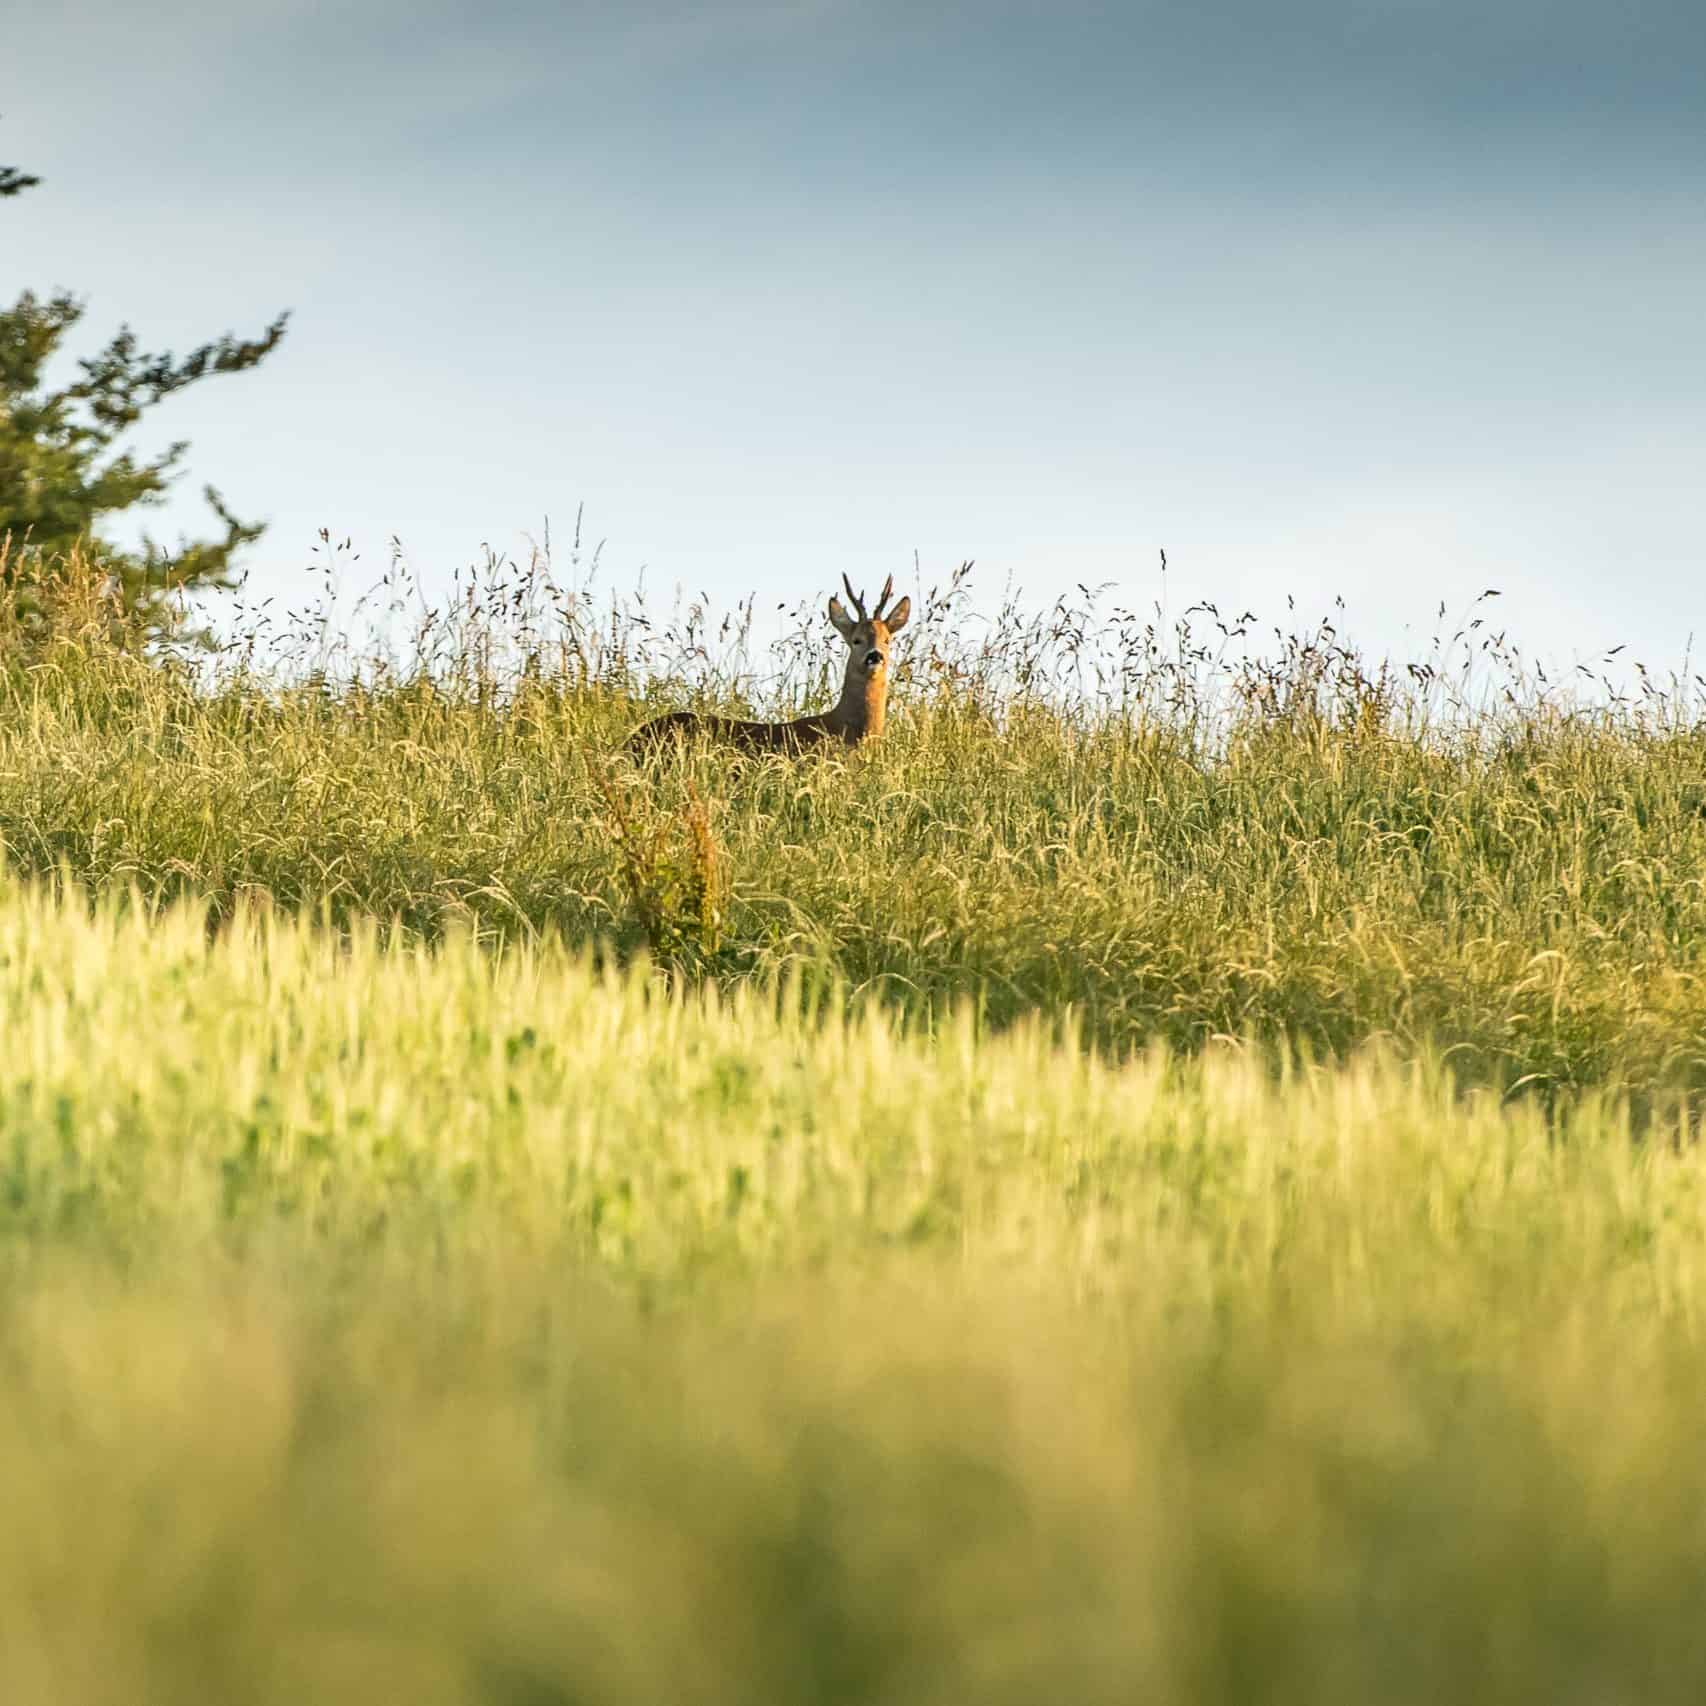 Deer stag stood in long grass